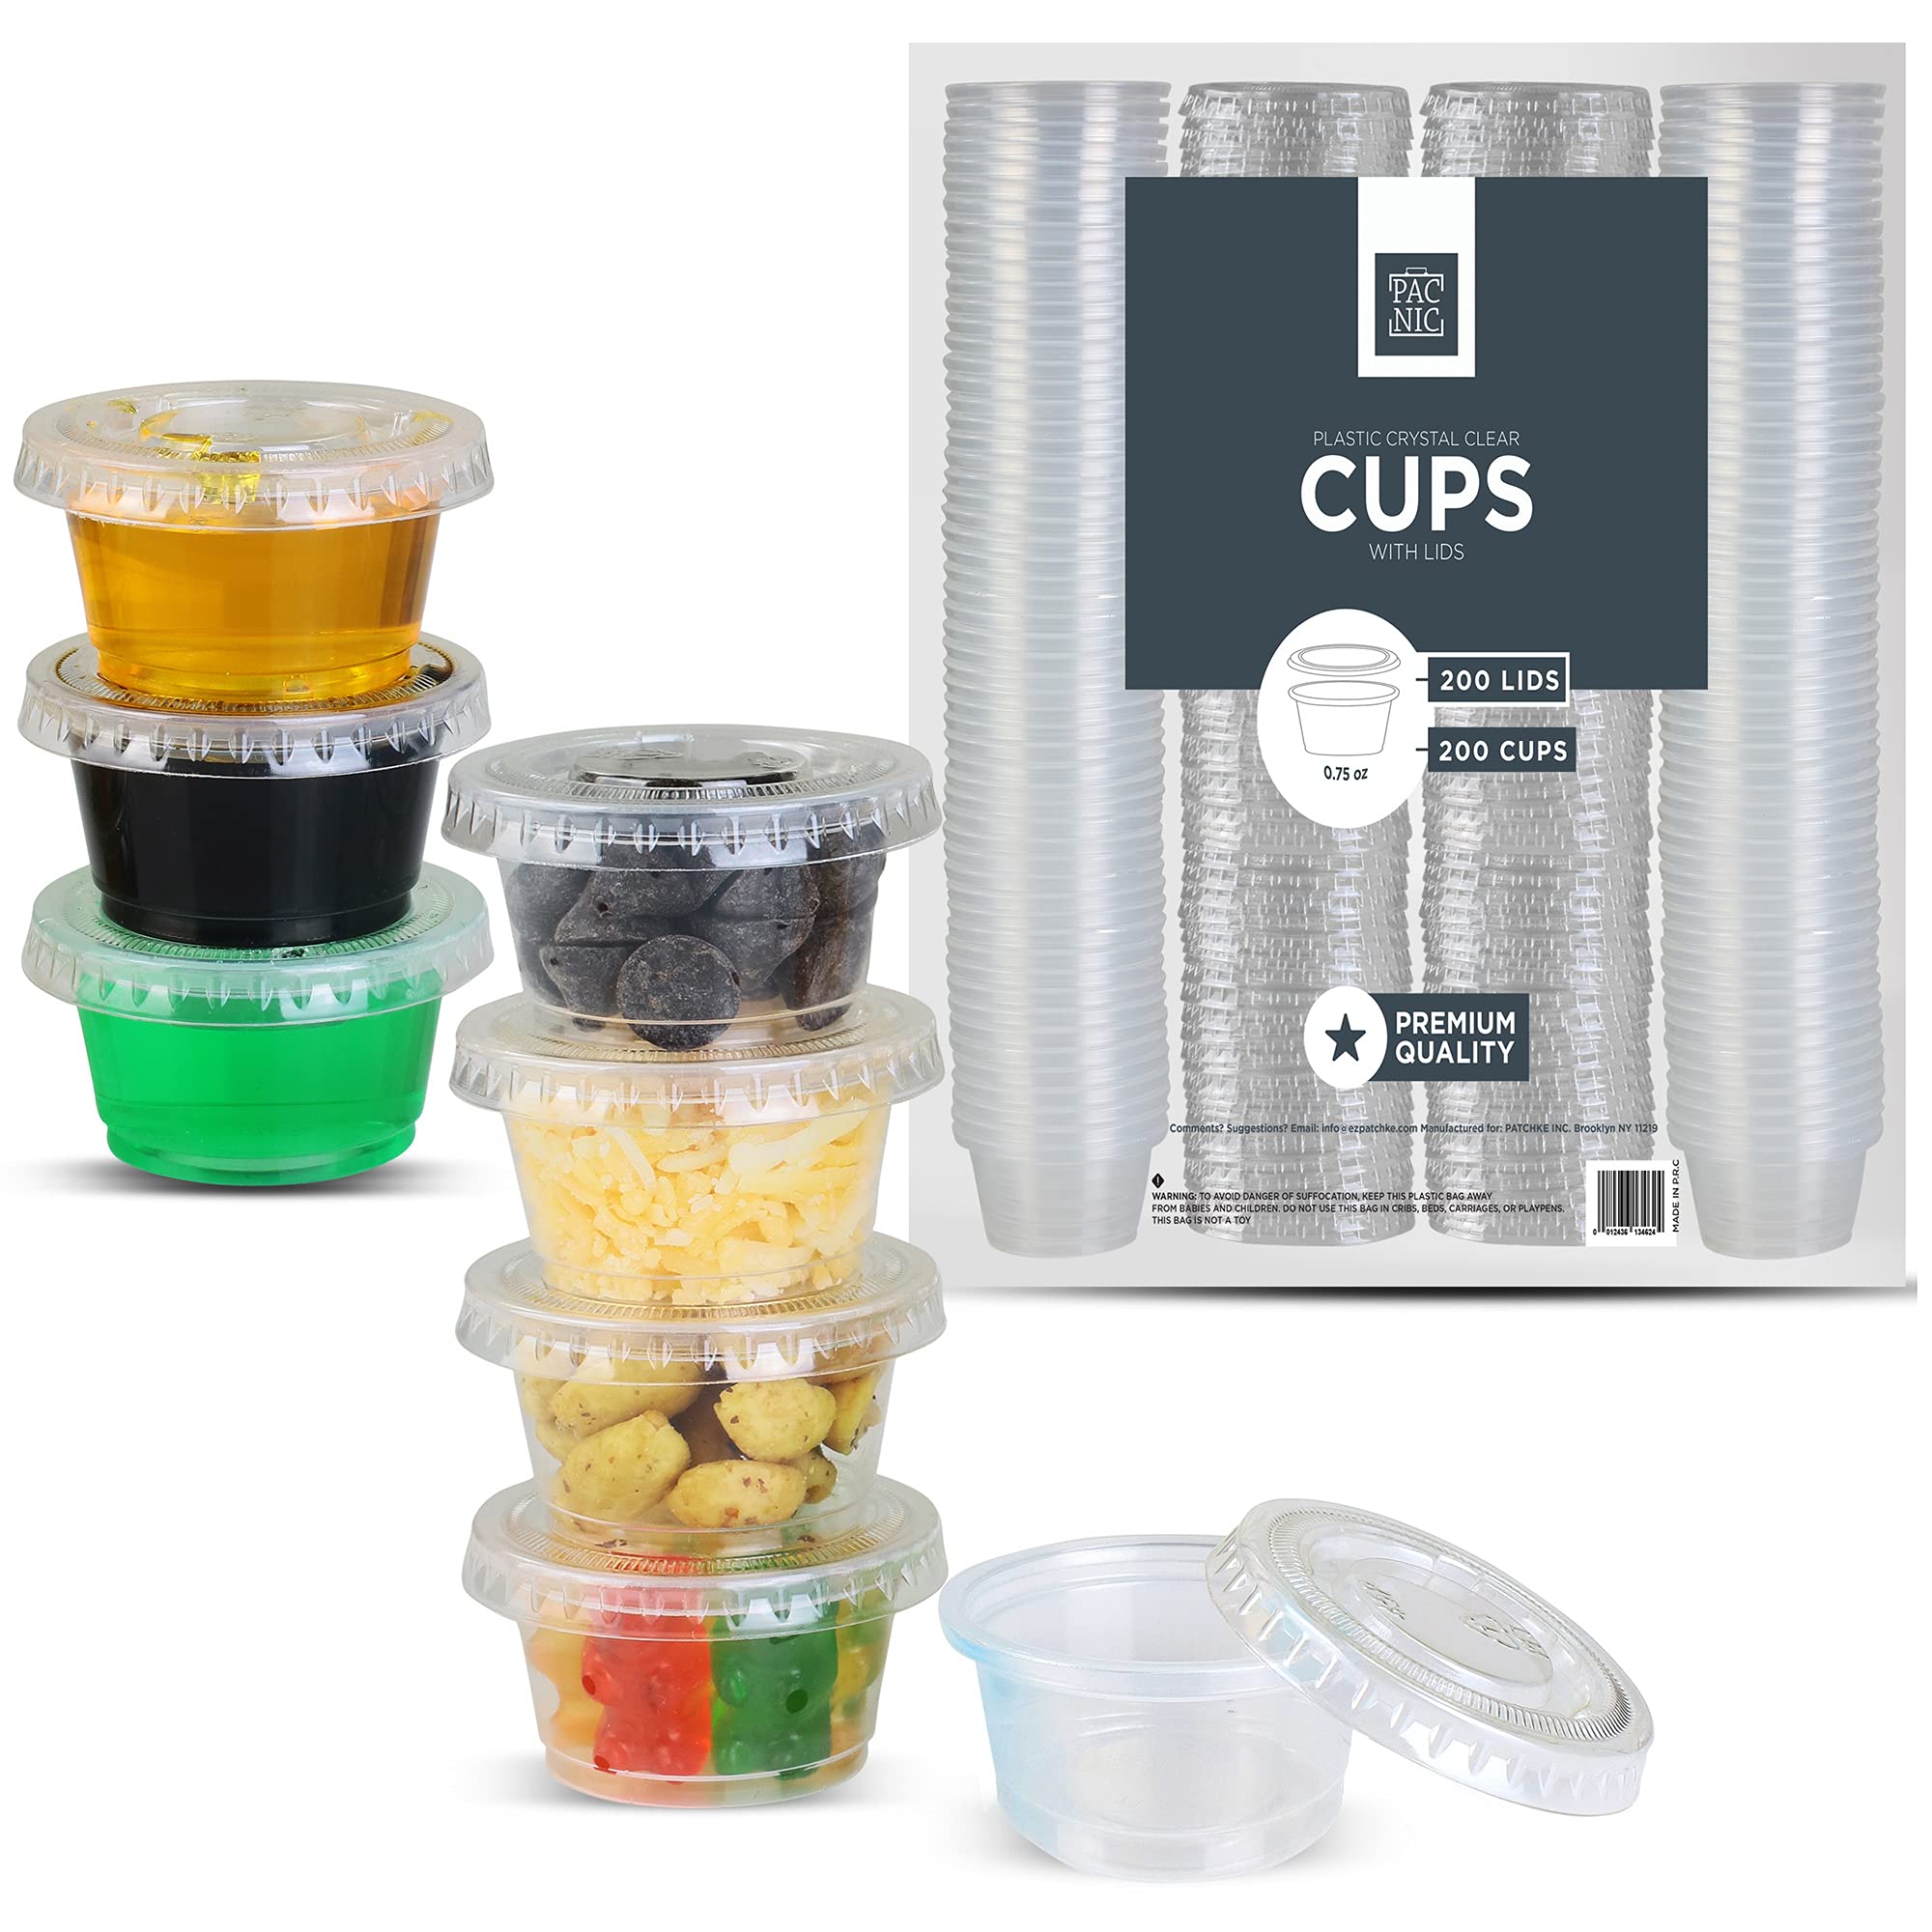 Condiment Containers With Lids Leak-proof Sauce Storage Box Small